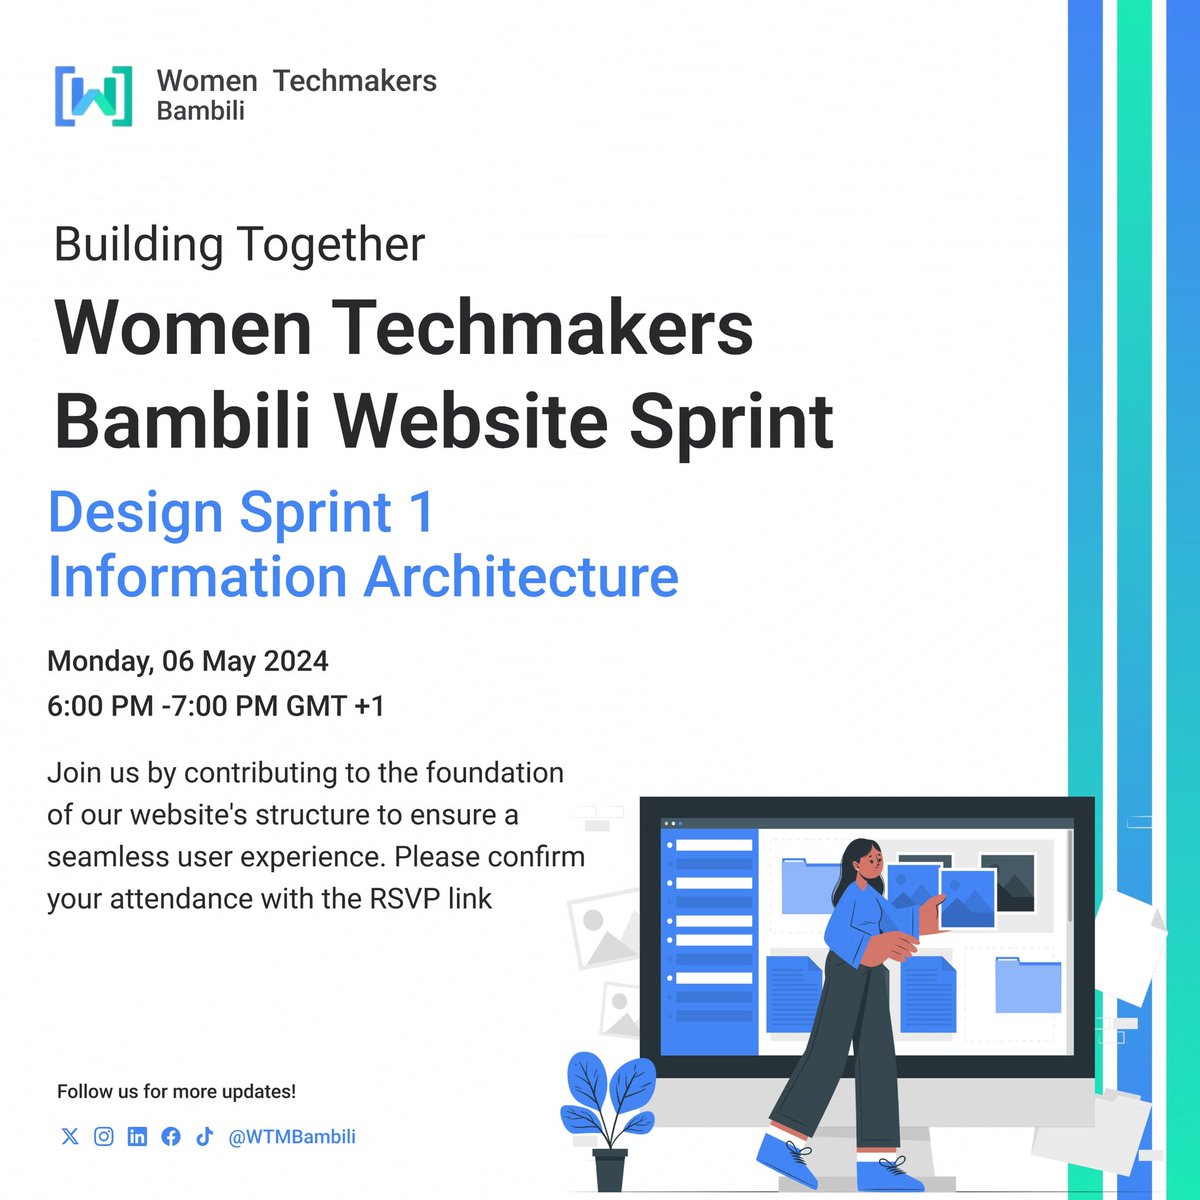 Hello girls❤️... Happy Sunday 😍 
Our design session is tomorrow.
Have you registered for it?
Here's the link below to RSVP.
Link: bit.ly/design-sprint-1
So make sure you do.❤️
It's gonna be a blast.

#WTMBambili